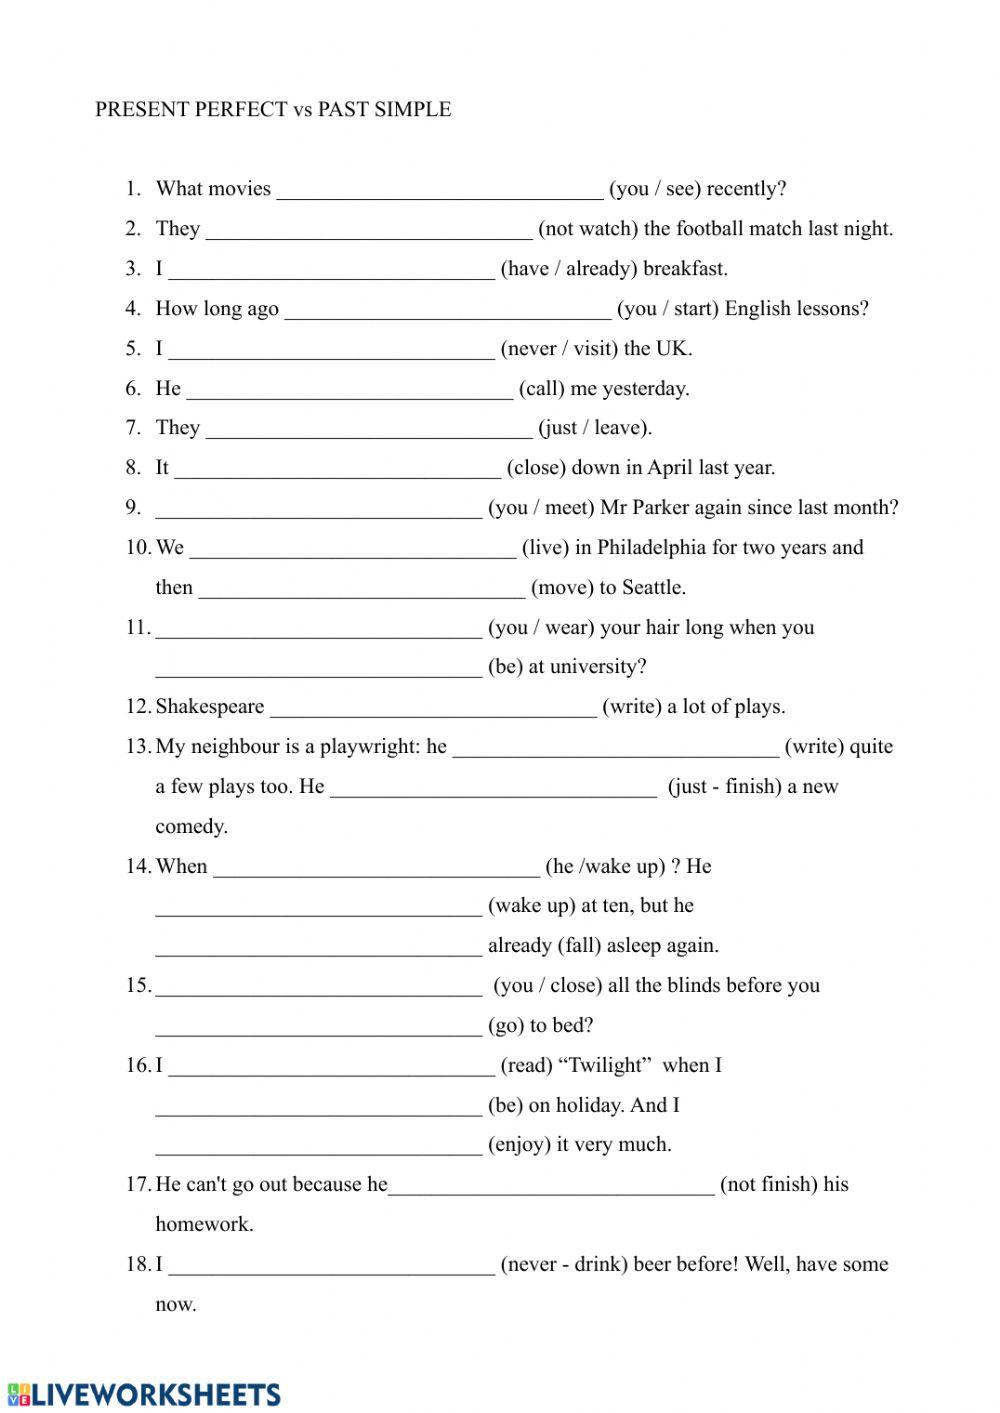 Present Perfect Past Simple interactive worksheet | Live Worksheets